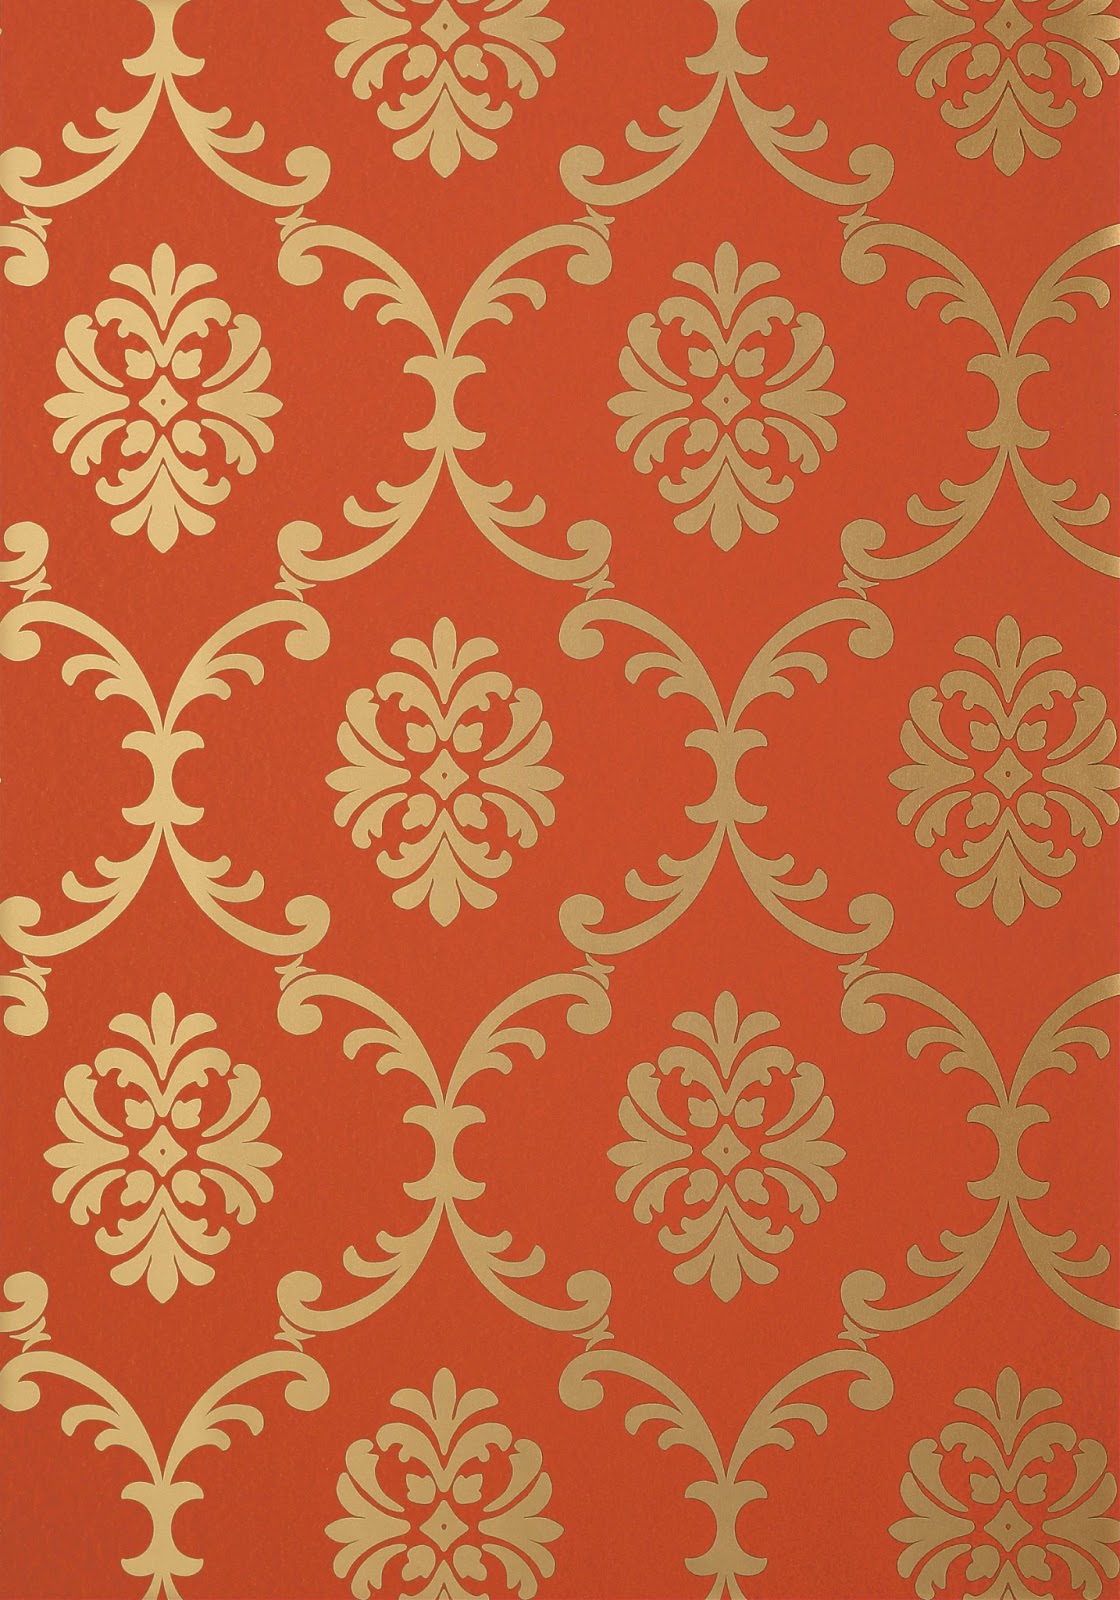 Factory Paint & Decorating: Monterey Wallpaper Collection